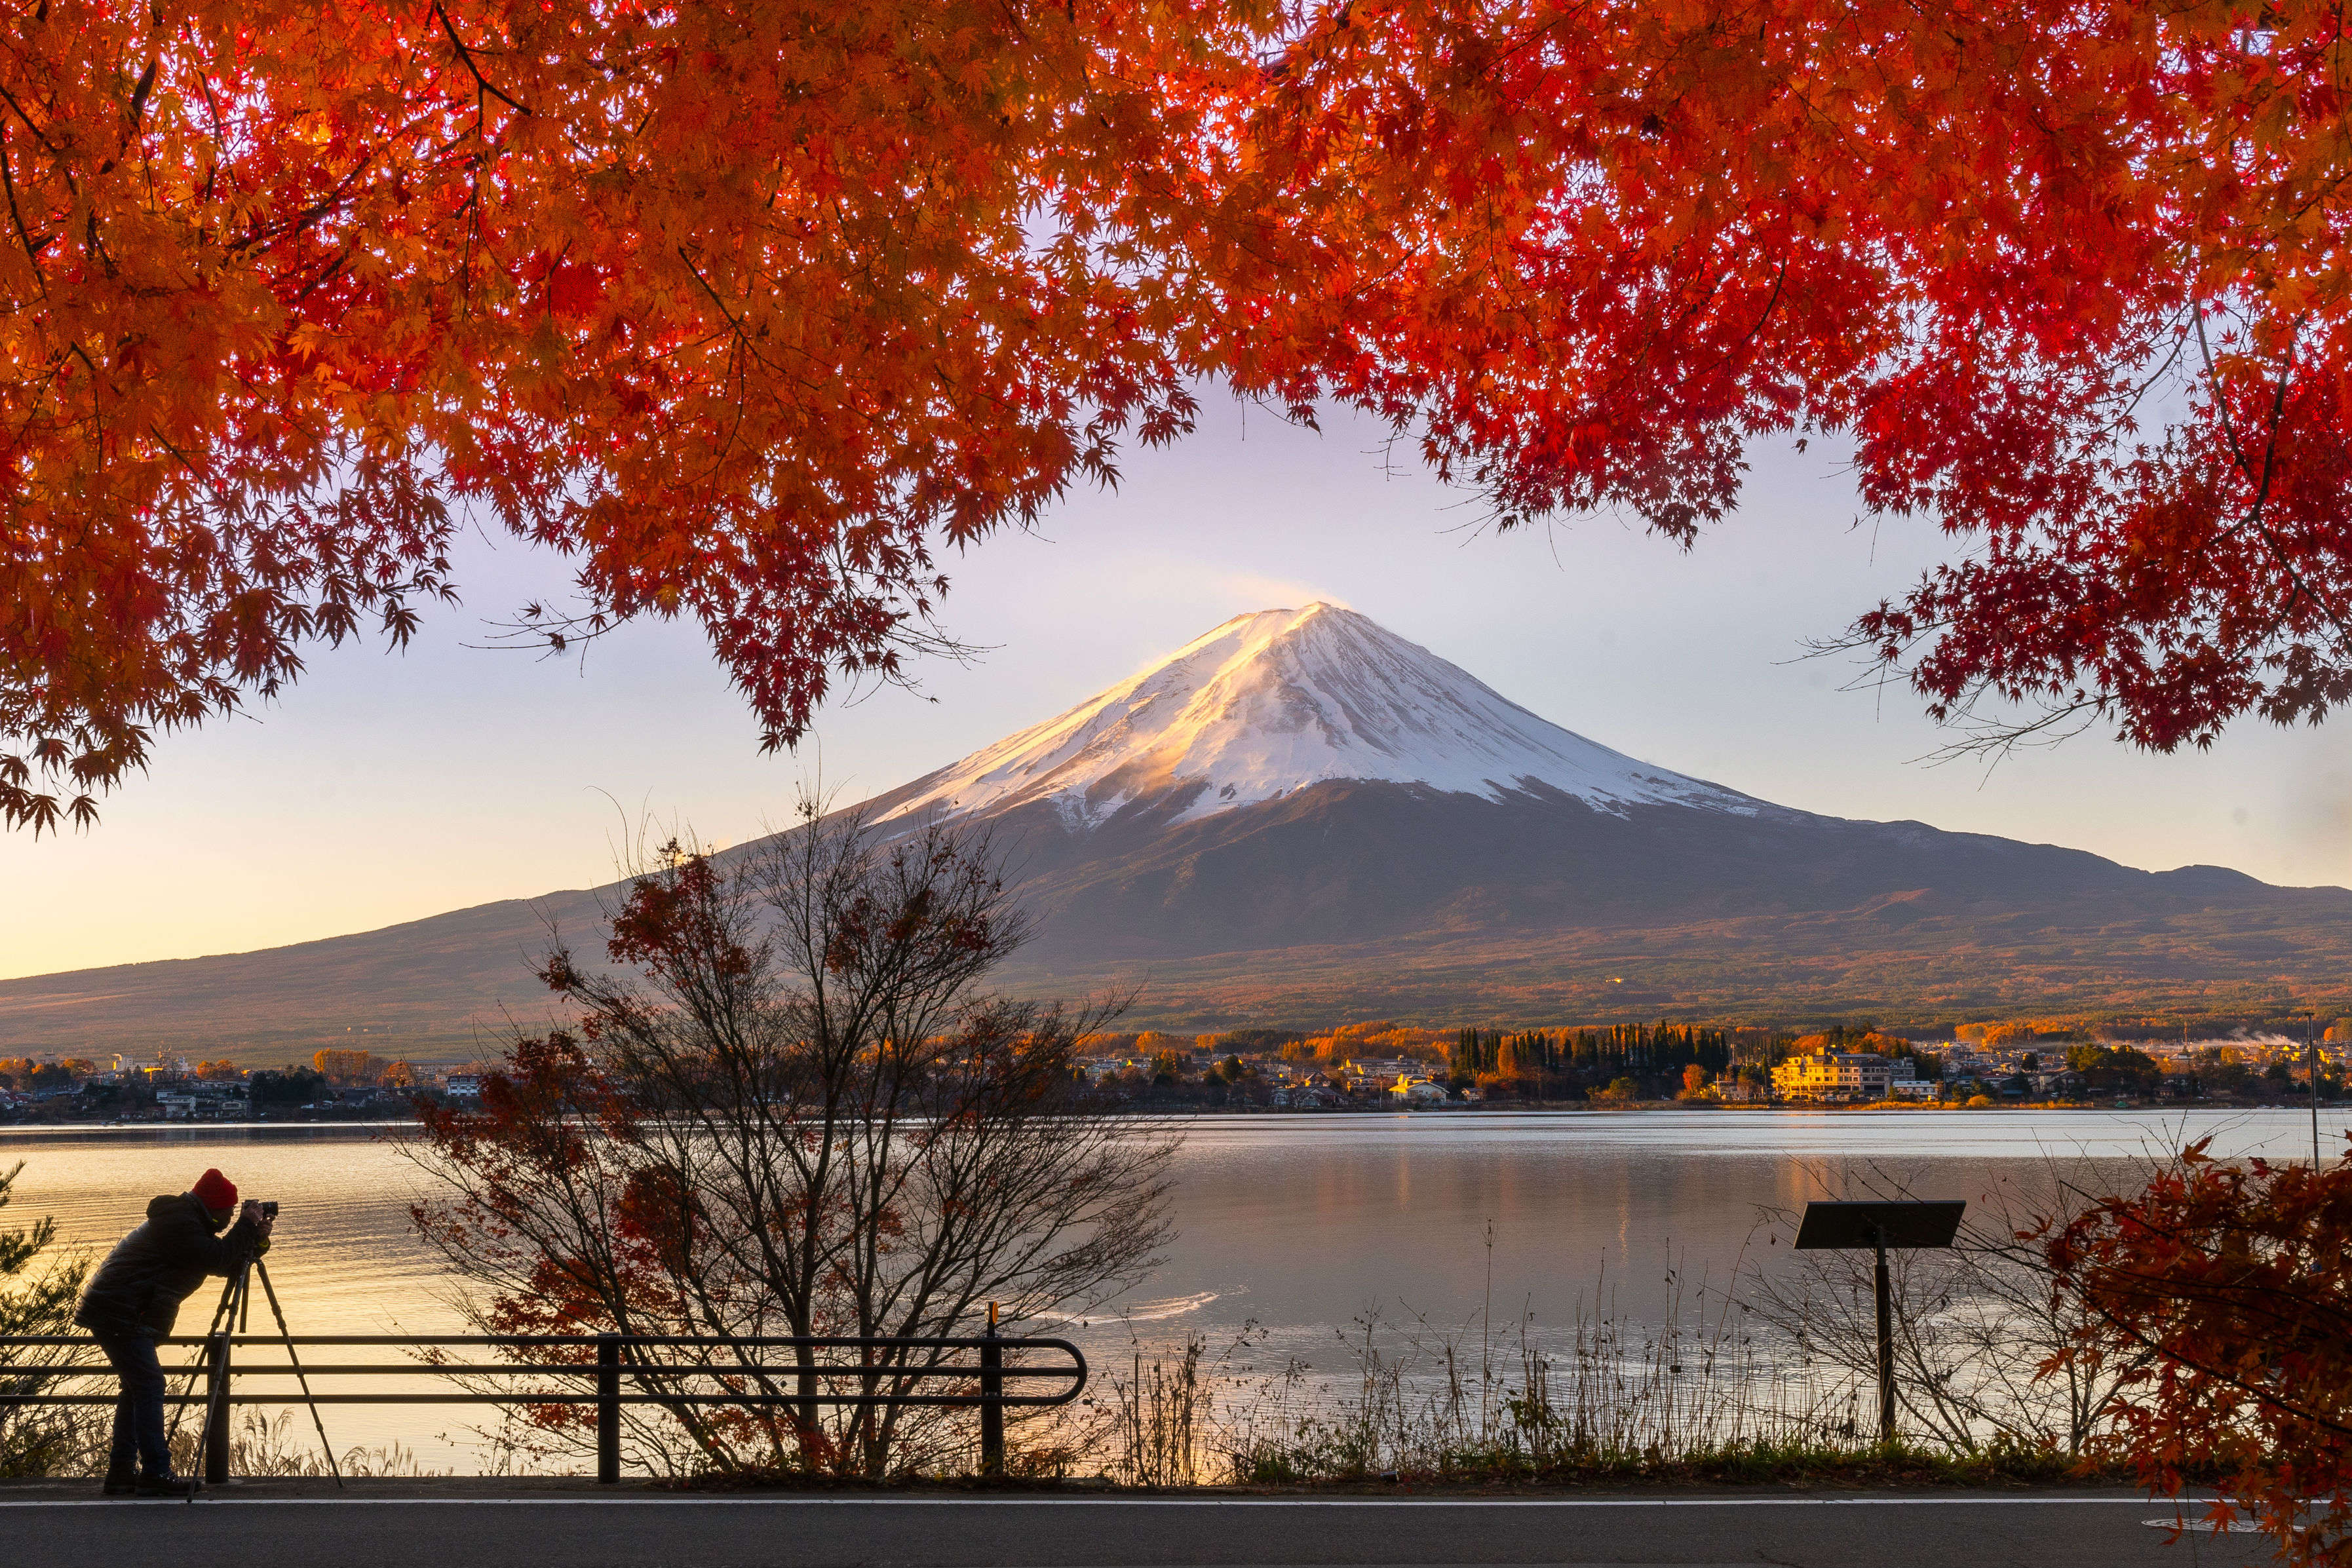 IRCTC’s Japan tour package is an incredible opportunity for travellers